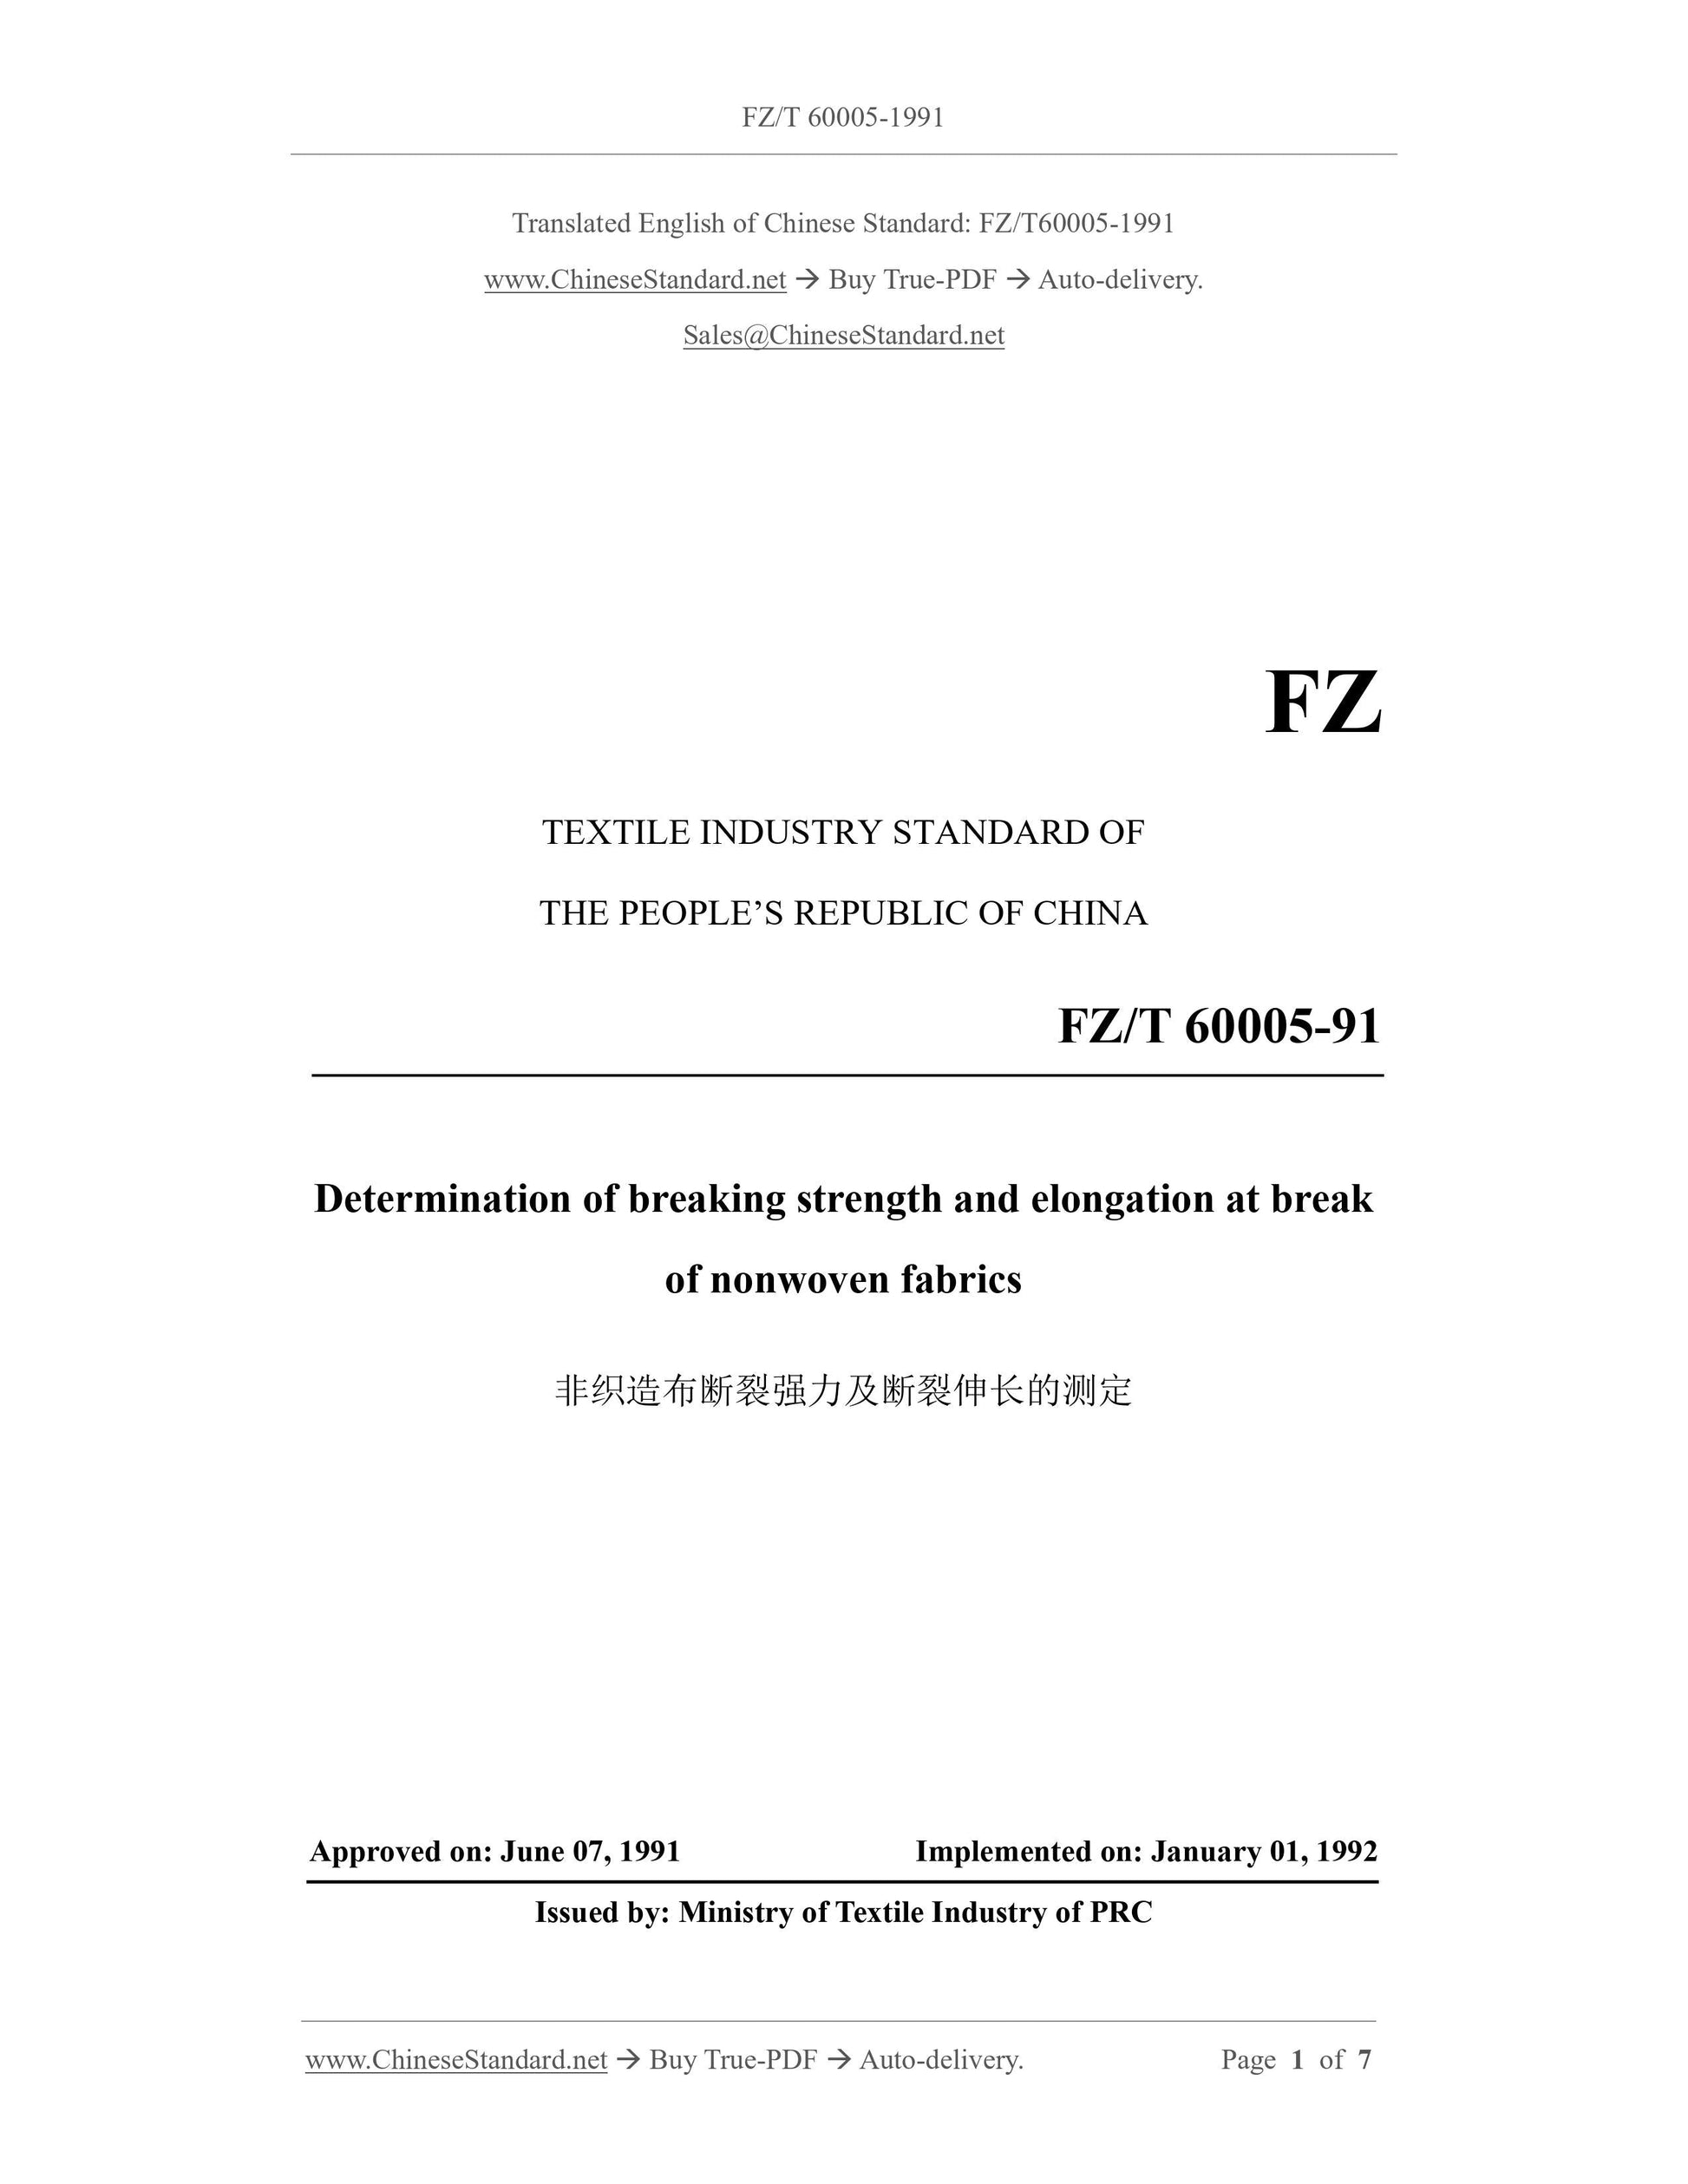 FZ/T 60005-1991 Page 1